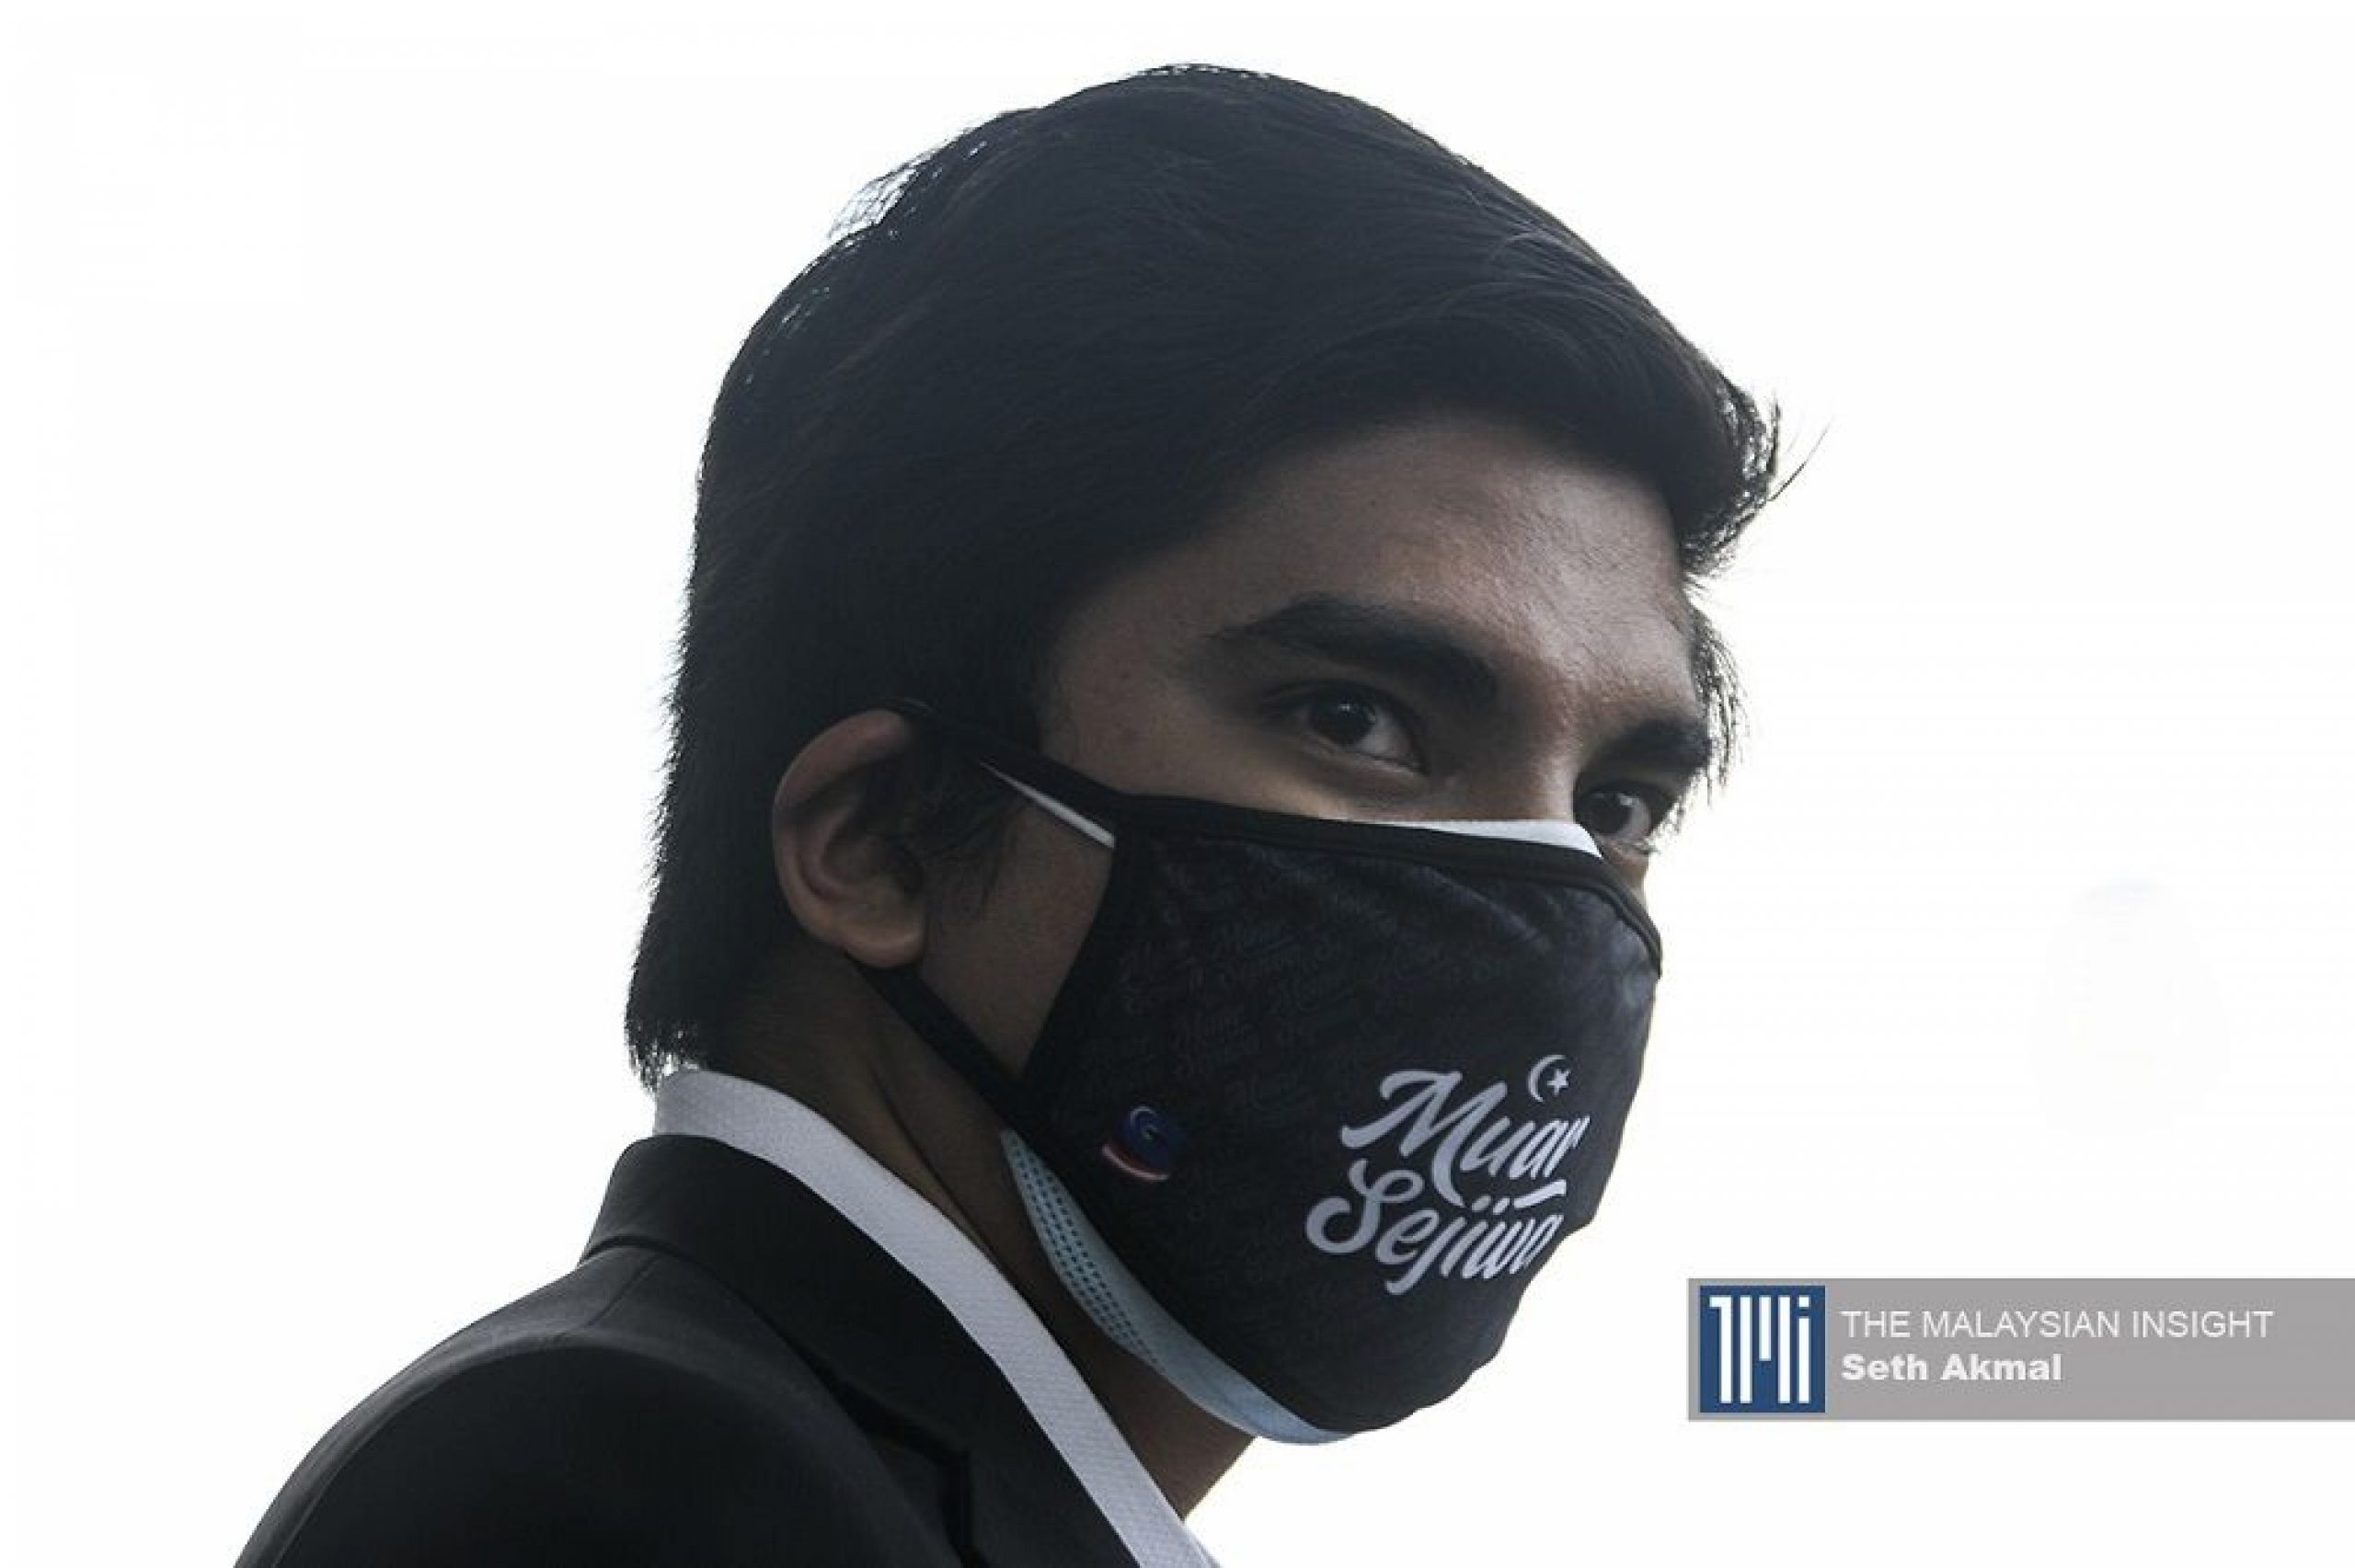 Syed Saddiq collects more than RM715,000 for bail in less than 24 hours